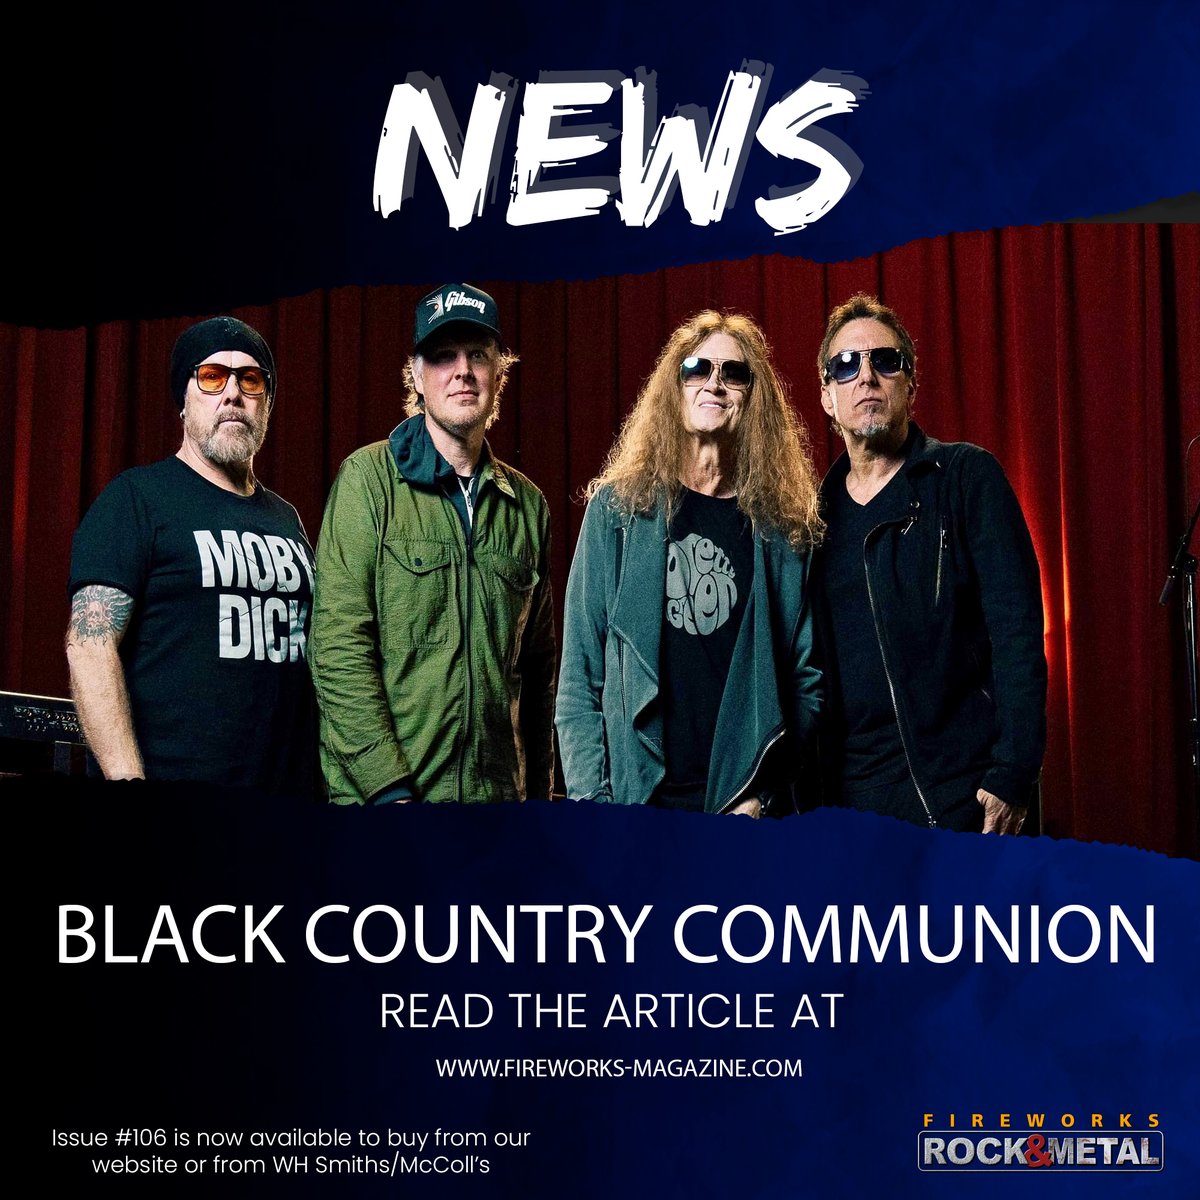 𝗘𝗫𝗖𝗘𝗟𝗟𝗘𝗡𝗧! Supergroup Black Country Communion Release Second Single 'Red Sun' from New Album 'V'. 𝘙𝘦𝘢𝘥 𝘢𝘣𝘰𝘶𝘵 𝘪𝘵 𝘩𝘦𝘳𝘦: wix.to/ccUGPBB @BCC_Rocks - BUY Issue #106 from fireworks-magazine.com 𝙐𝙆 𝙎𝙪𝙗𝙨𝙘𝙧𝙞𝙥𝙩𝙞𝙤𝙣𝙨 𝙣𝙤𝙬 𝙟𝙪𝙨𝙩 £32